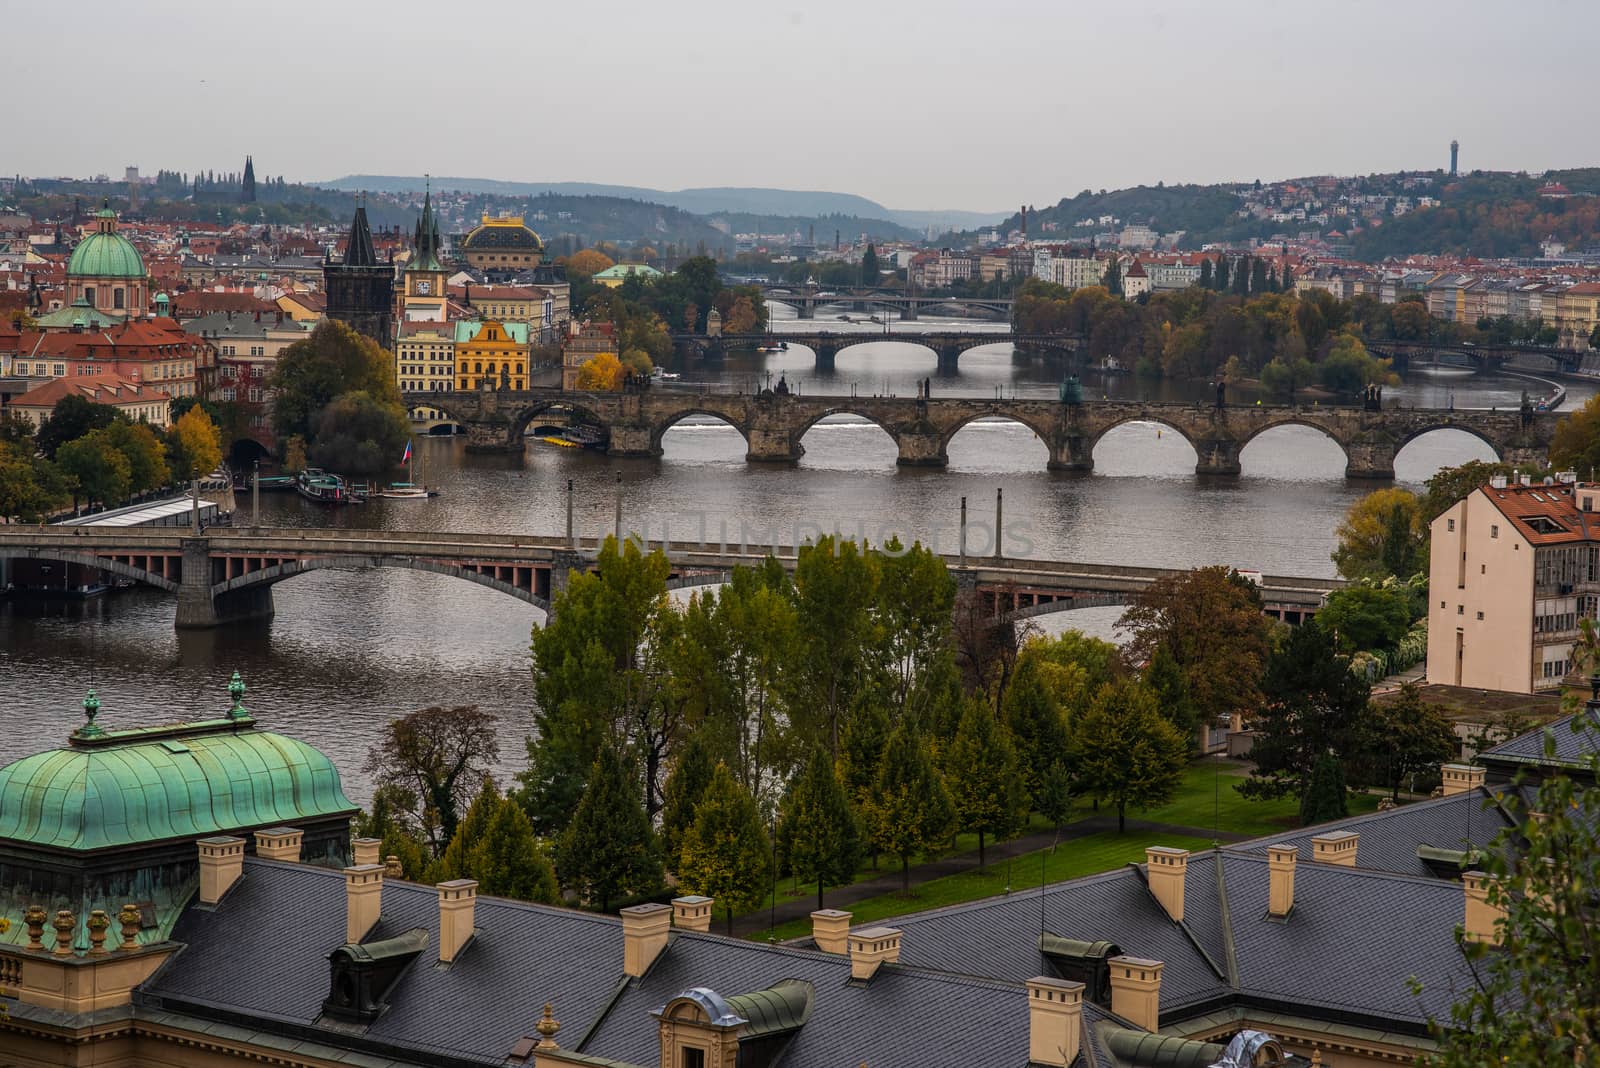 Panoramic view of the city of Prague taken from Park in Czech Republic